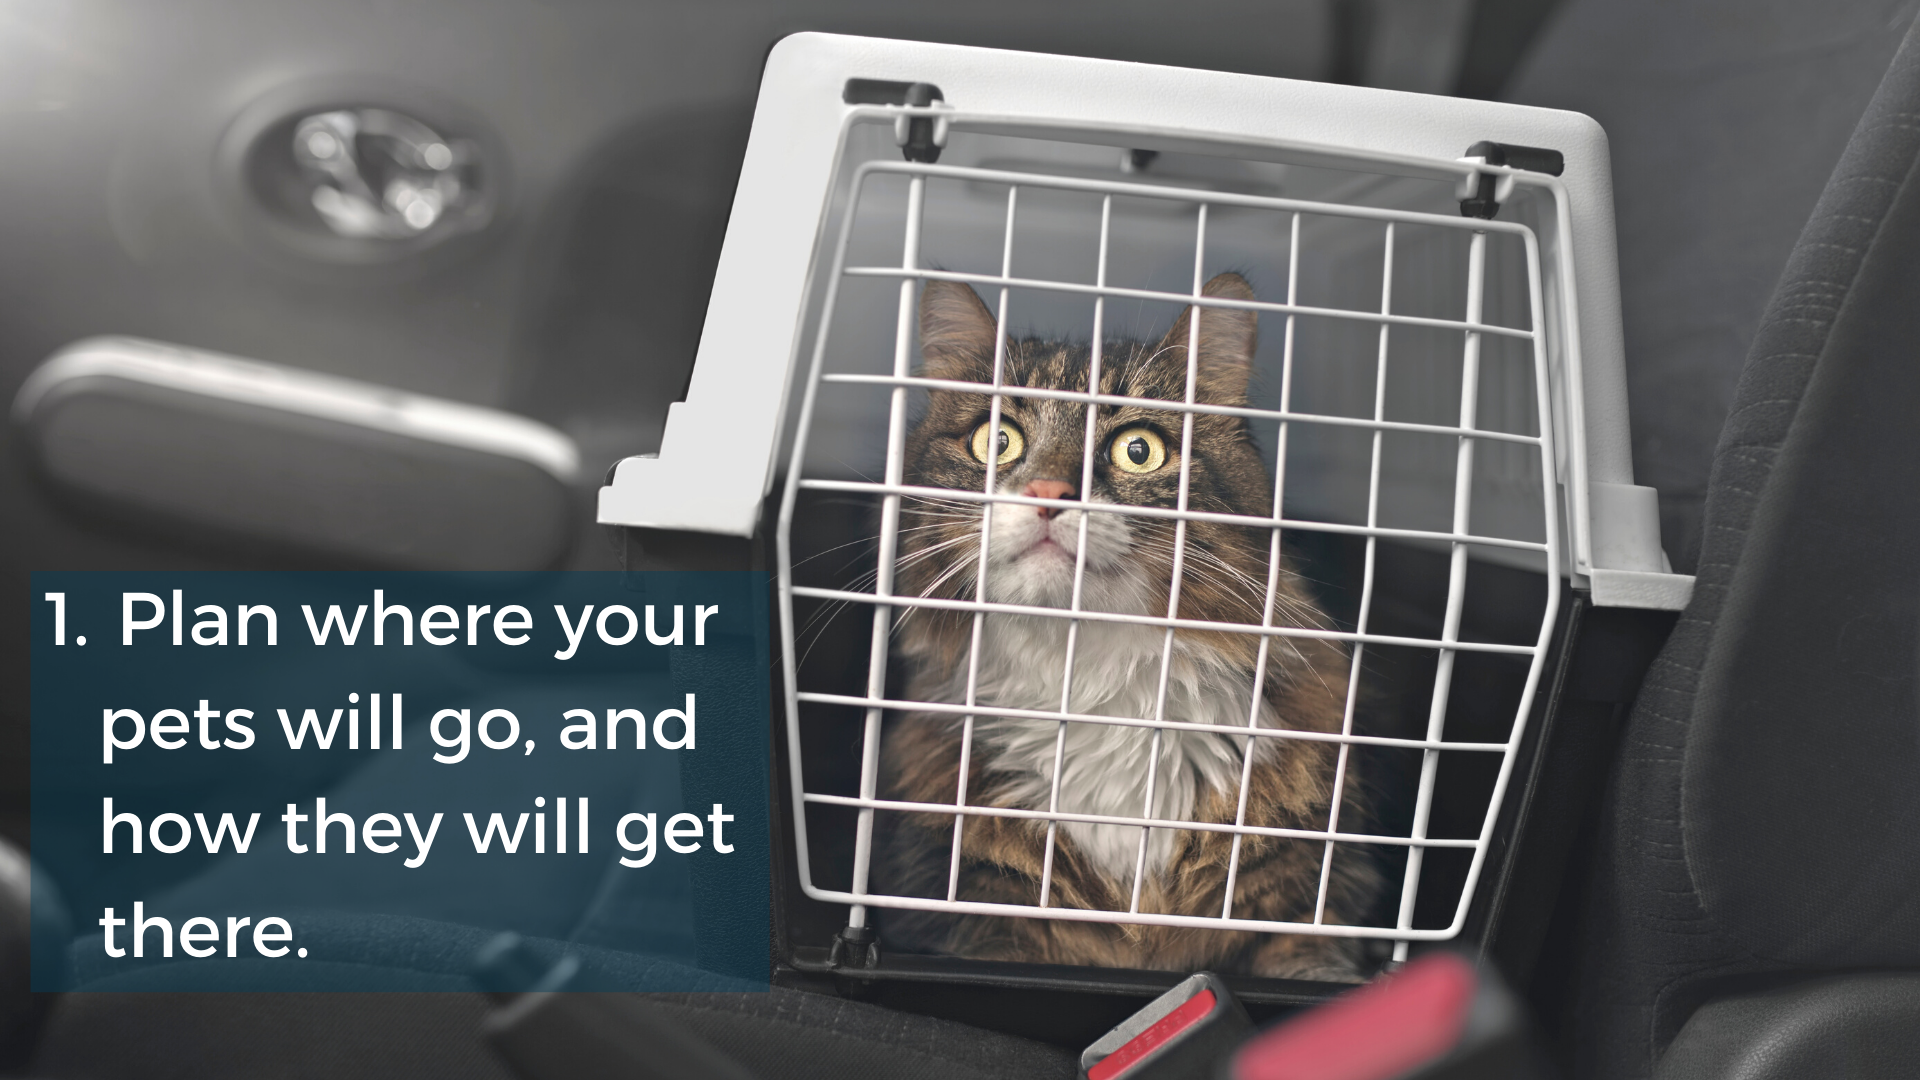 Know where your pet will go and how they will get there.